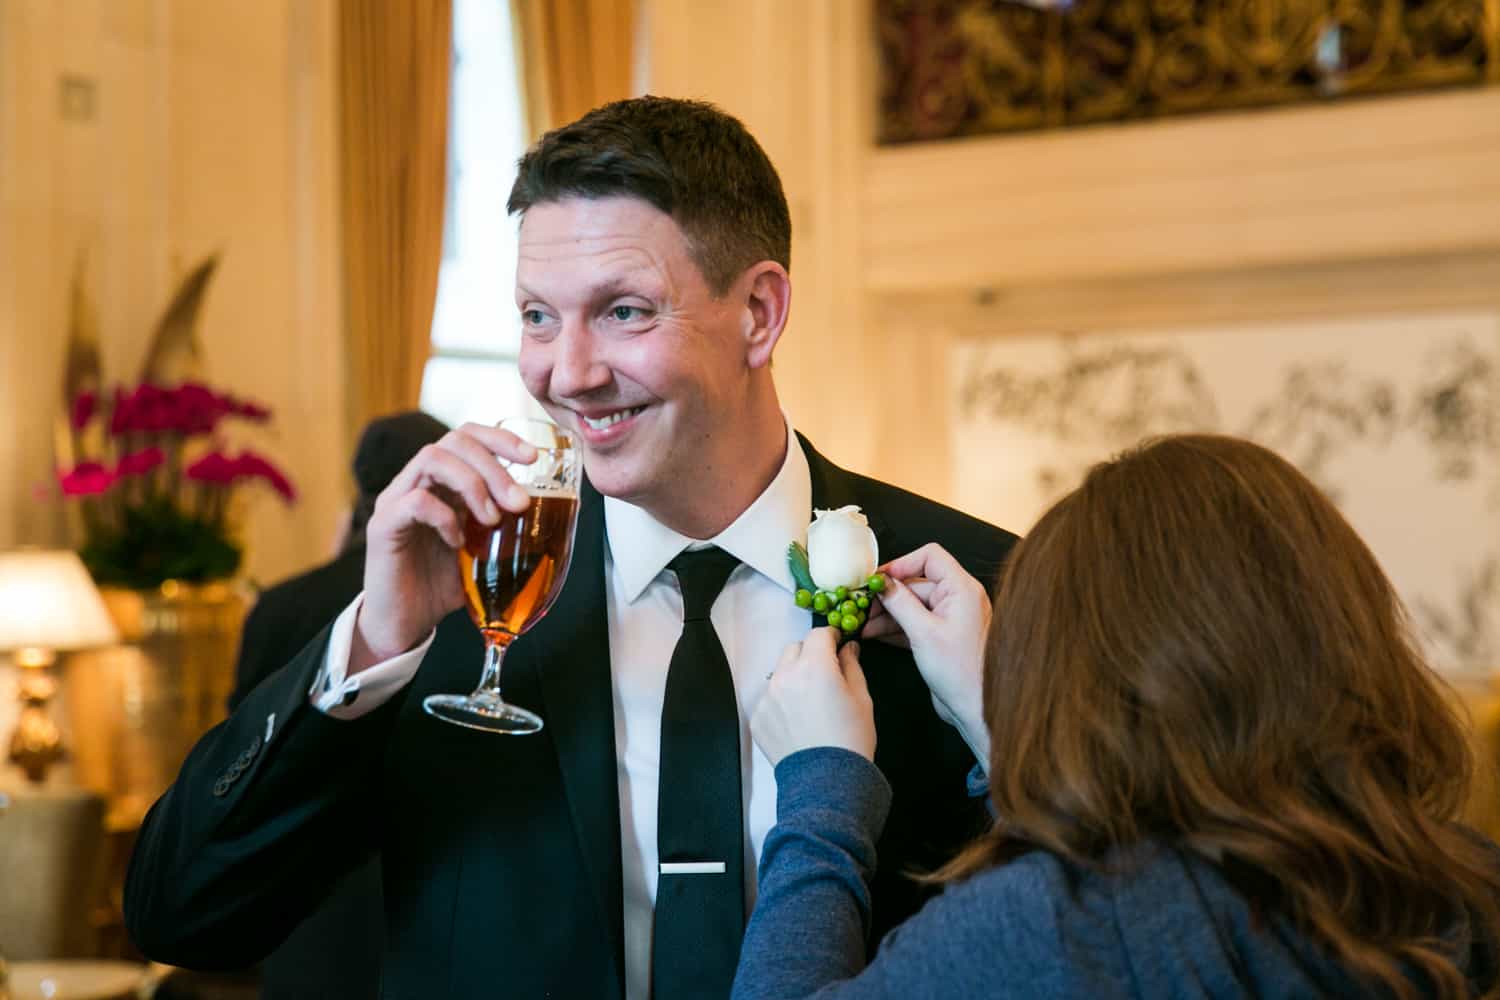 Groom drinking glass of beer while having boutonniere put on